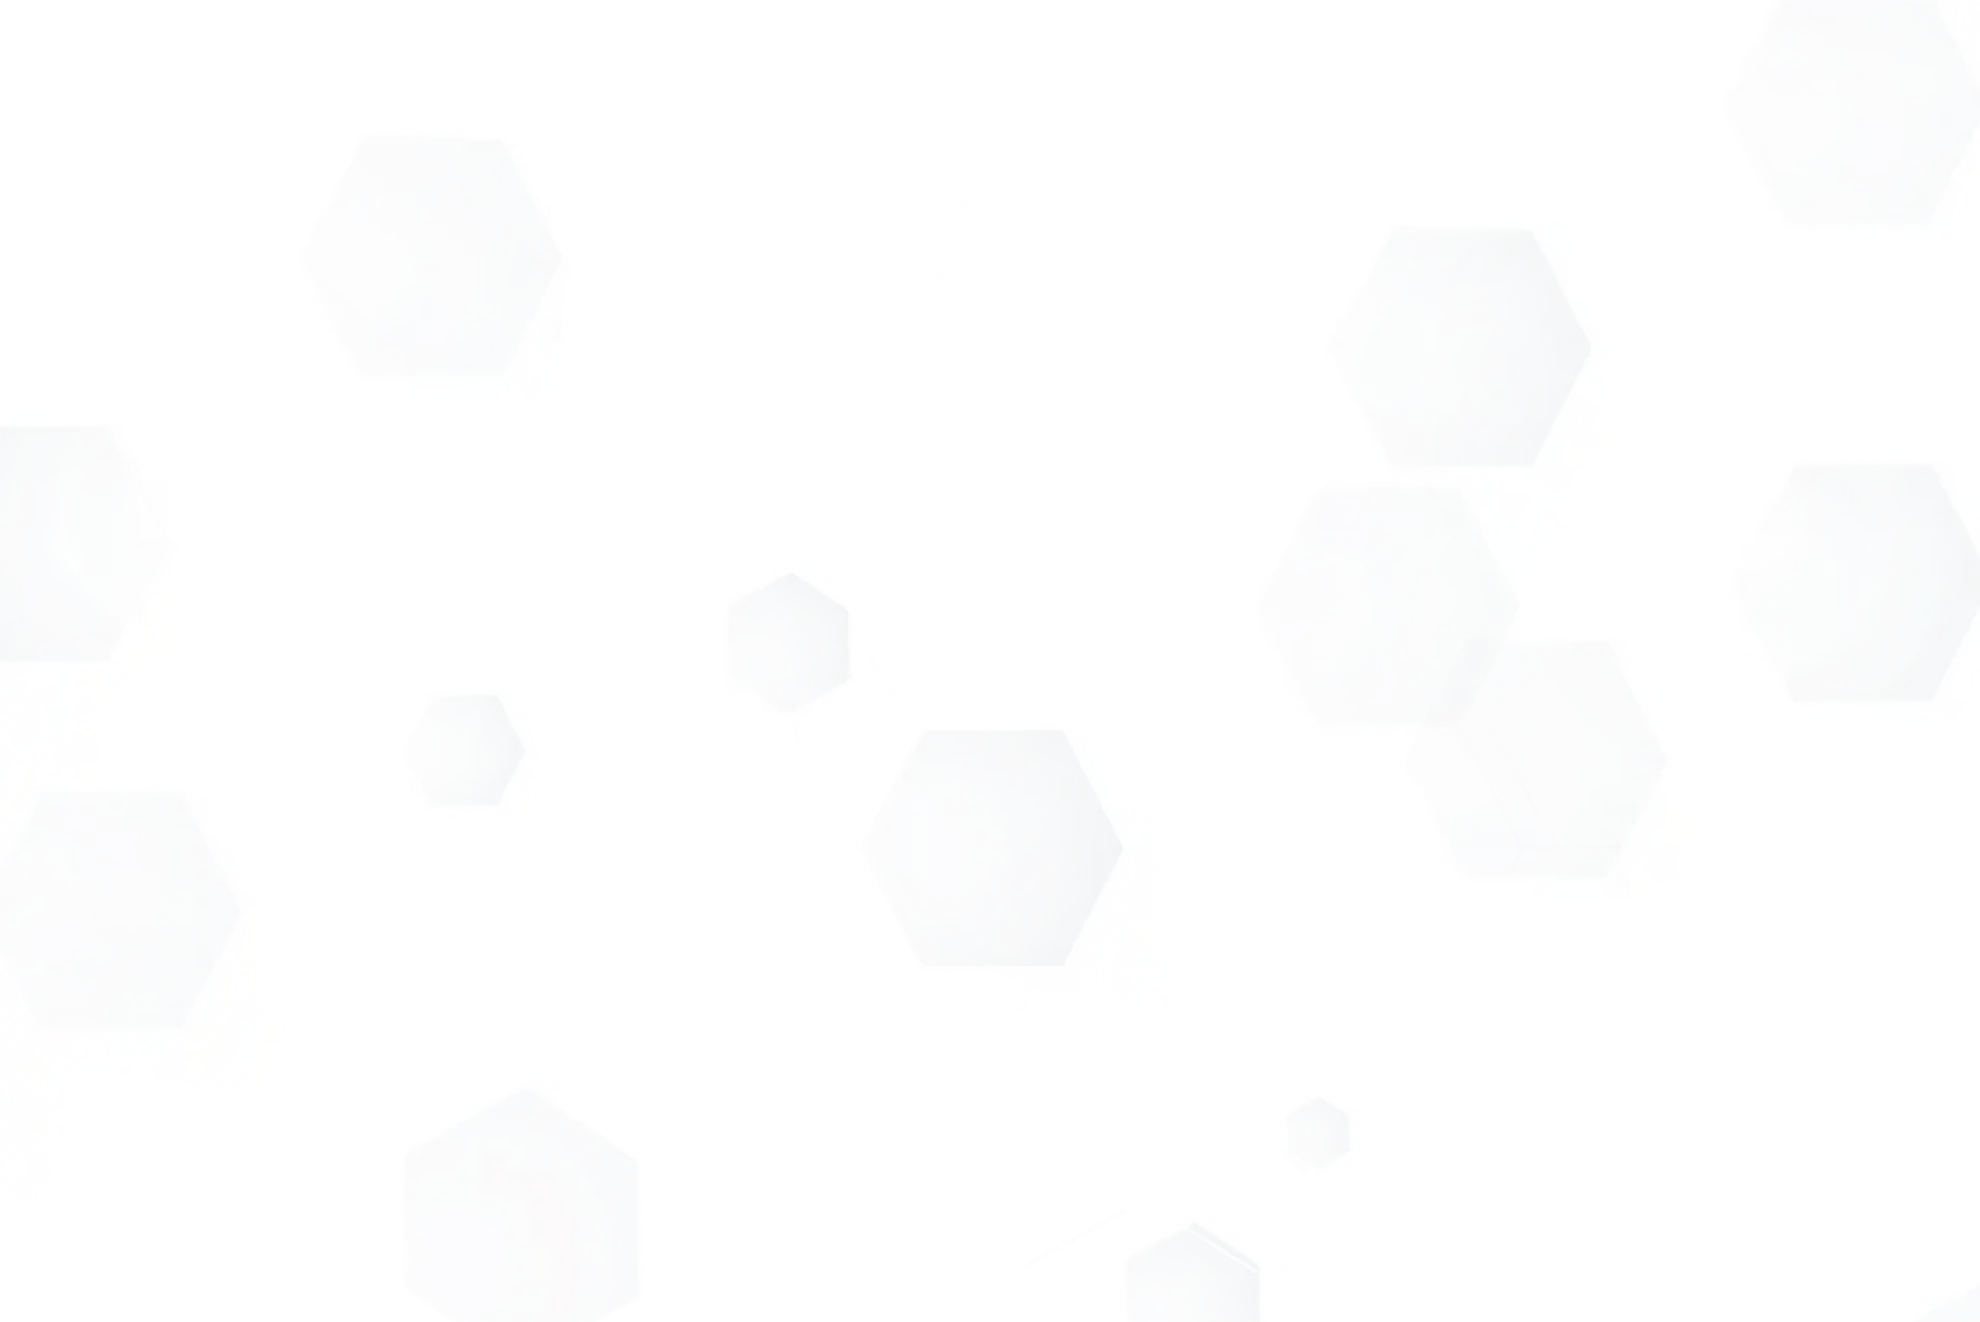 Hexagons as a background